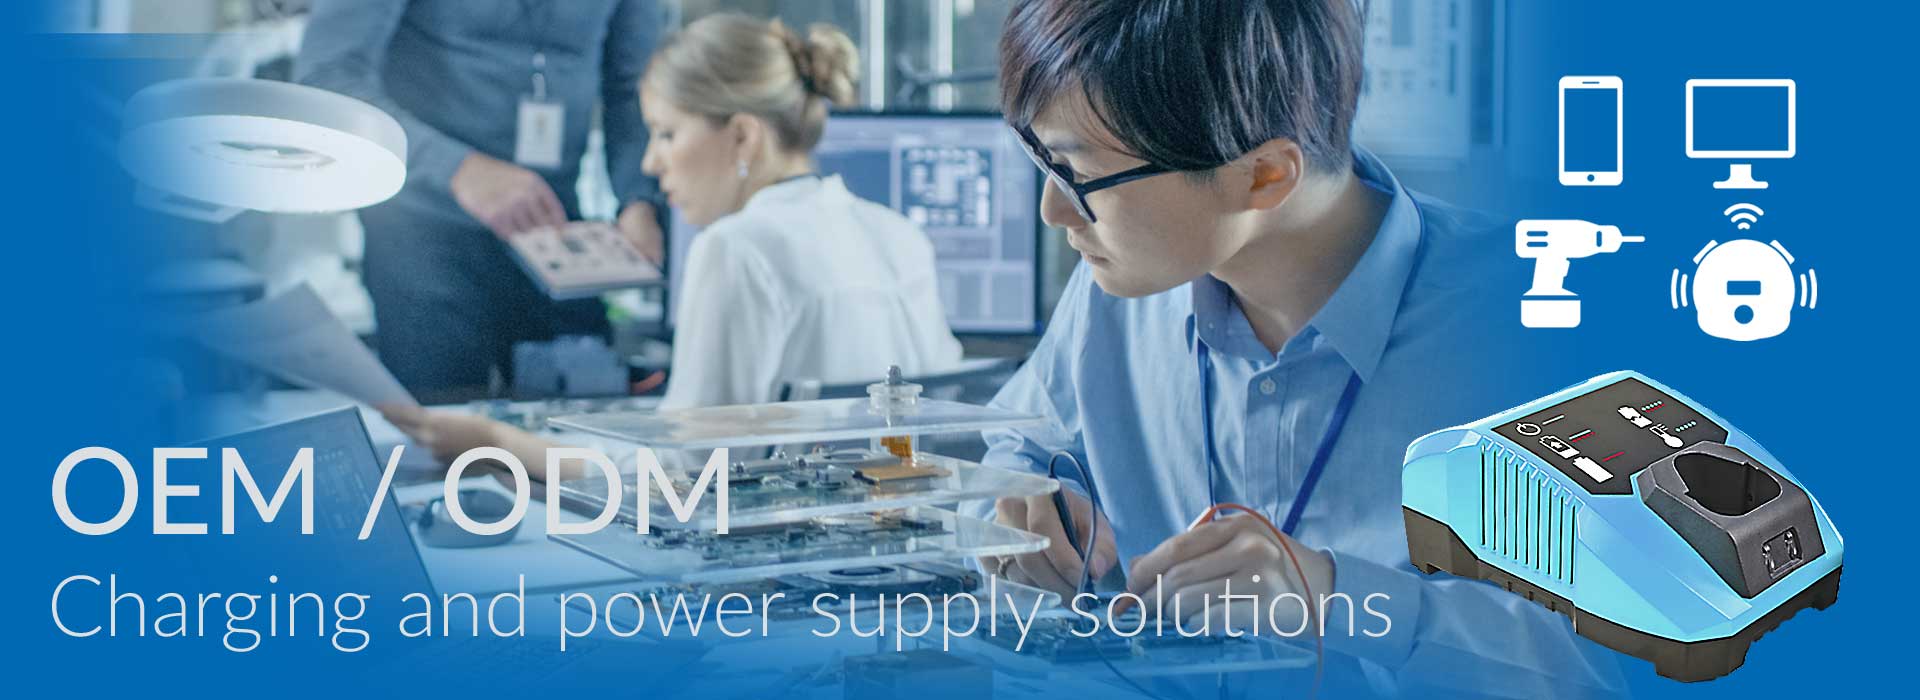 oem-odm-Charging-power-supply-solutions